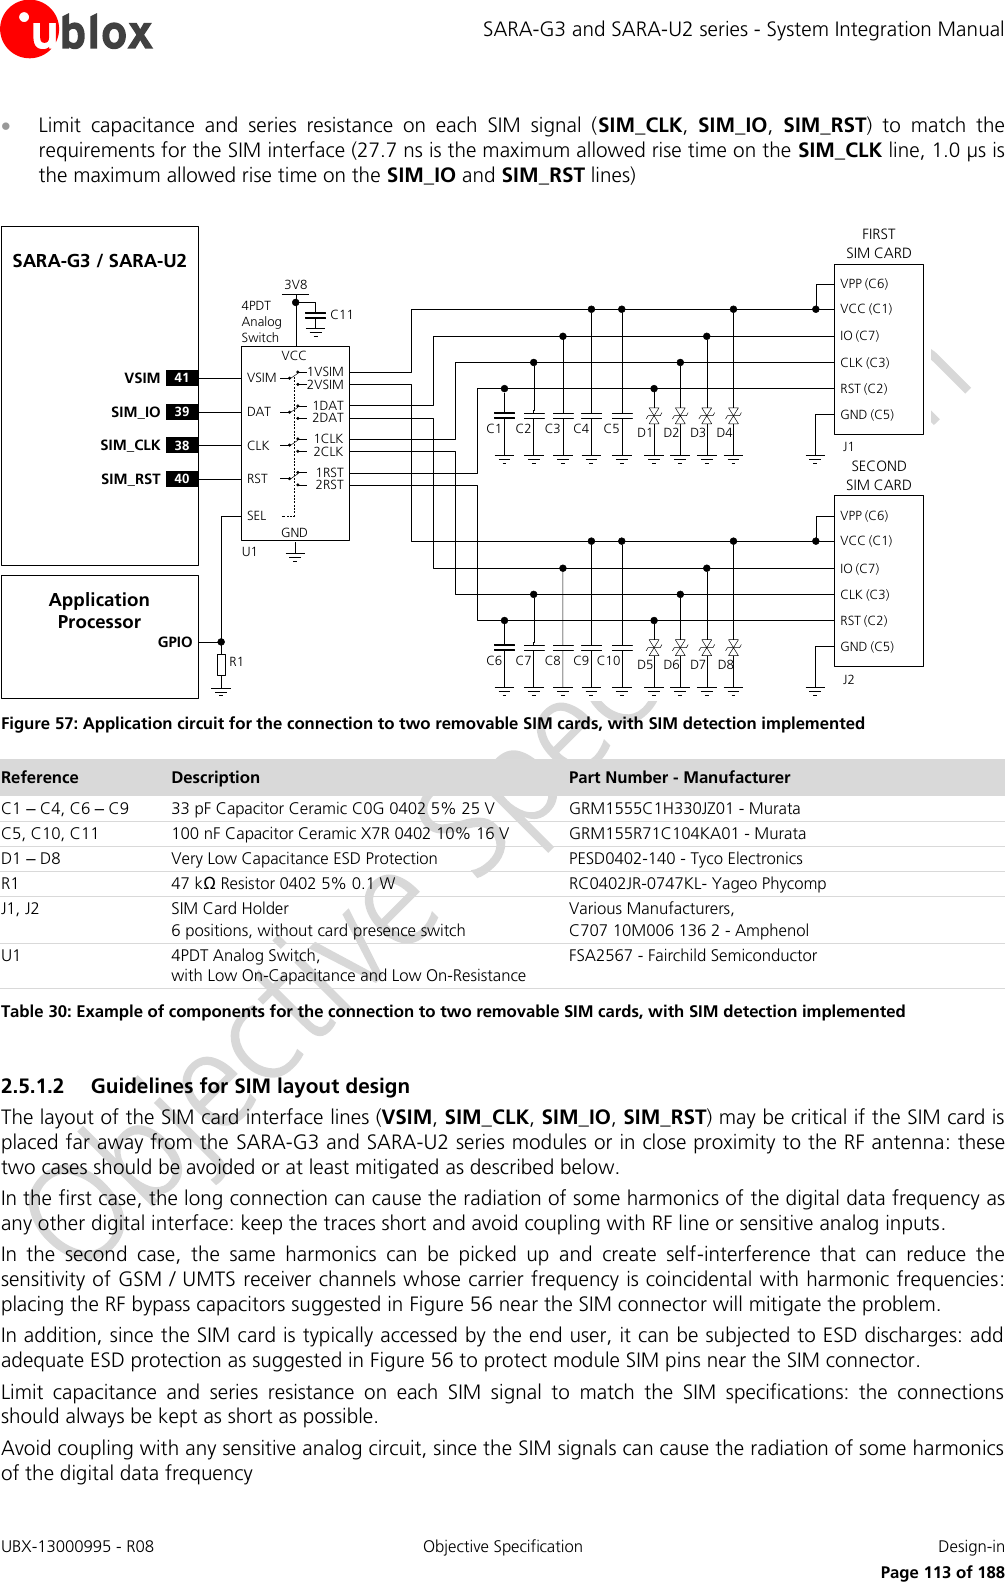 SARA-G3 and SARA-U2 series - System Integration Manual UBX-13000995 - R08  Objective Specification  Design-in     Page 113 of 188  Limit  capacitance  and  series  resistance  on  each  SIM  signal  (SIM_CLK,  SIM_IO,  SIM_RST)  to  match  the requirements for the SIM interface (27.7 ns is the maximum allowed rise time on the SIM_CLK line, 1.0 µs is the maximum allowed rise time on the SIM_IO and SIM_RST lines)  SARA-G3 / SARA-U2C1FIRST             SIM CARDVPP (C6)VCC (C1)IO (C7)CLK (C3)RST (C2)GND (C5)C2 C3 C5J1C4 D1 D2 D3 D4GNDU141VSIM VSIM 1VSIM2VSIMVCCC114PDT Analog Switch3V839SIM_IO DAT 1DAT2DAT38SIM_CLK CLK 1CLK2CLK40SIM_RST RST 1RST2RSTSELSECOND   SIM CARDVPP (C6)VCC (C1)IO (C7)CLK (C3)RST (C2)GND (C5)J2C6 C7 C8 C10C9 D5 D6 D7 D8Application ProcessorGPIOR1 Figure 57: Application circuit for the connection to two removable SIM cards, with SIM detection implemented Reference Description Part Number - Manufacturer C1 – C4, C6 – C9 33 pF Capacitor Ceramic C0G 0402 5% 25 V GRM1555C1H330JZ01 - Murata C5, C10, C11 100 nF Capacitor Ceramic X7R 0402 10% 16 V GRM155R71C104KA01 - Murata D1 – D8 Very Low Capacitance ESD Protection PESD0402-140 - Tyco Electronics  R1 47 kΩ Resistor 0402 5% 0.1 W RC0402JR-0747KL- Yageo Phycomp J1, J2 SIM Card Holder 6 positions, without card presence switch Various Manufacturers, C707 10M006 136 2 - Amphenol U1 4PDT Analog Switch,  with Low On-Capacitance and Low On-Resistance FSA2567 - Fairchild Semiconductor Table 30: Example of components for the connection to two removable SIM cards, with SIM detection implemented  2.5.1.2 Guidelines for SIM layout design The layout of the SIM card interface lines (VSIM, SIM_CLK, SIM_IO, SIM_RST) may be critical if the SIM card is placed far away from the SARA-G3 and SARA-U2 series modules or in close proximity to the RF antenna: these two cases should be avoided or at least mitigated as described below.  In the first case, the long connection can cause the radiation of some harmonics of the digital data frequency as any other digital interface: keep the traces short and avoid coupling with RF line or sensitive analog inputs. In  the  second  case,  the  same  harmonics  can  be  picked  up  and  create  self-interference  that  can  reduce  the sensitivity of GSM / UMTS receiver channels whose carrier frequency is coincidental with harmonic frequencies: placing the RF bypass capacitors suggested in Figure 56 near the SIM connector will mitigate the problem. In addition, since the SIM card is typically accessed by the end user, it can be subjected to ESD discharges: add adequate ESD protection as suggested in Figure 56 to protect module SIM pins near the SIM connector. Limit  capacitance  and  series  resistance  on  each  SIM  signal  to  match  the  SIM  specifications:  the  connections should always be kept as short as possible. Avoid coupling with any sensitive analog circuit, since the SIM signals can cause the radiation of some harmonics of the digital data frequency 